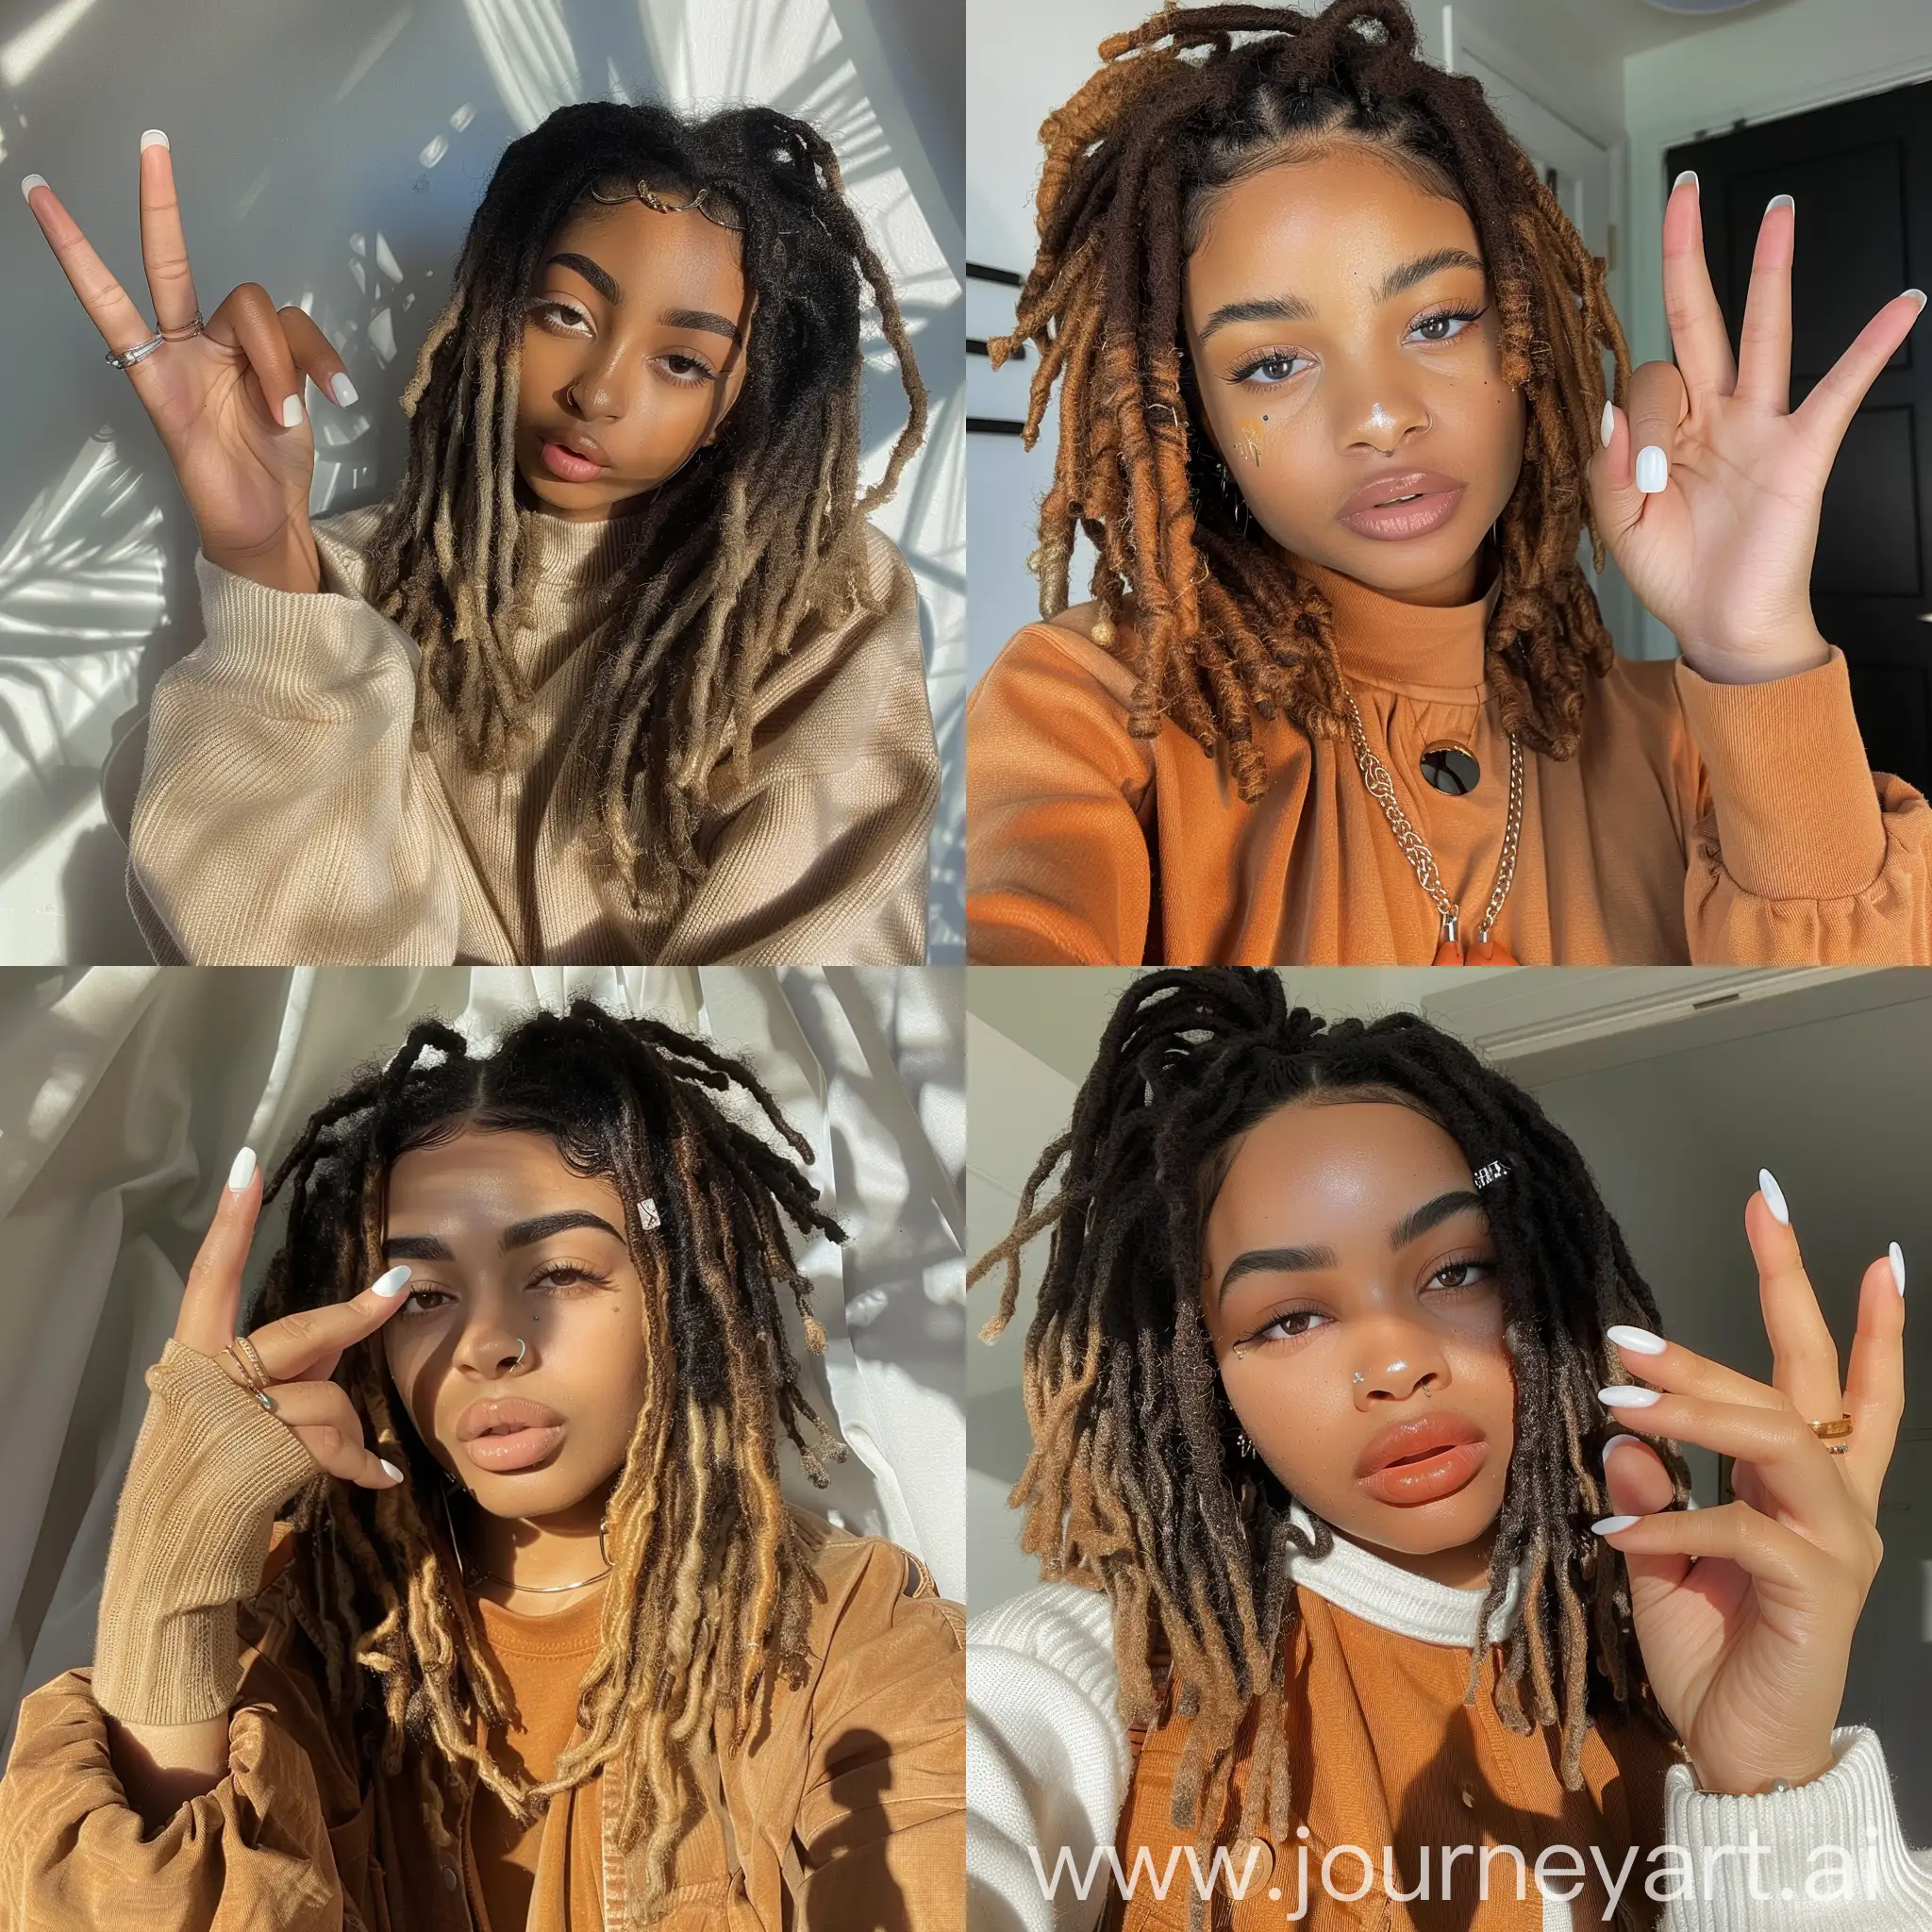 Aesthetic instagram selfie of a black teenage influencer with ombre dreadlocks, one hand up, showing off white gel nail polish, soft brown clothing color tones--ar 9:16